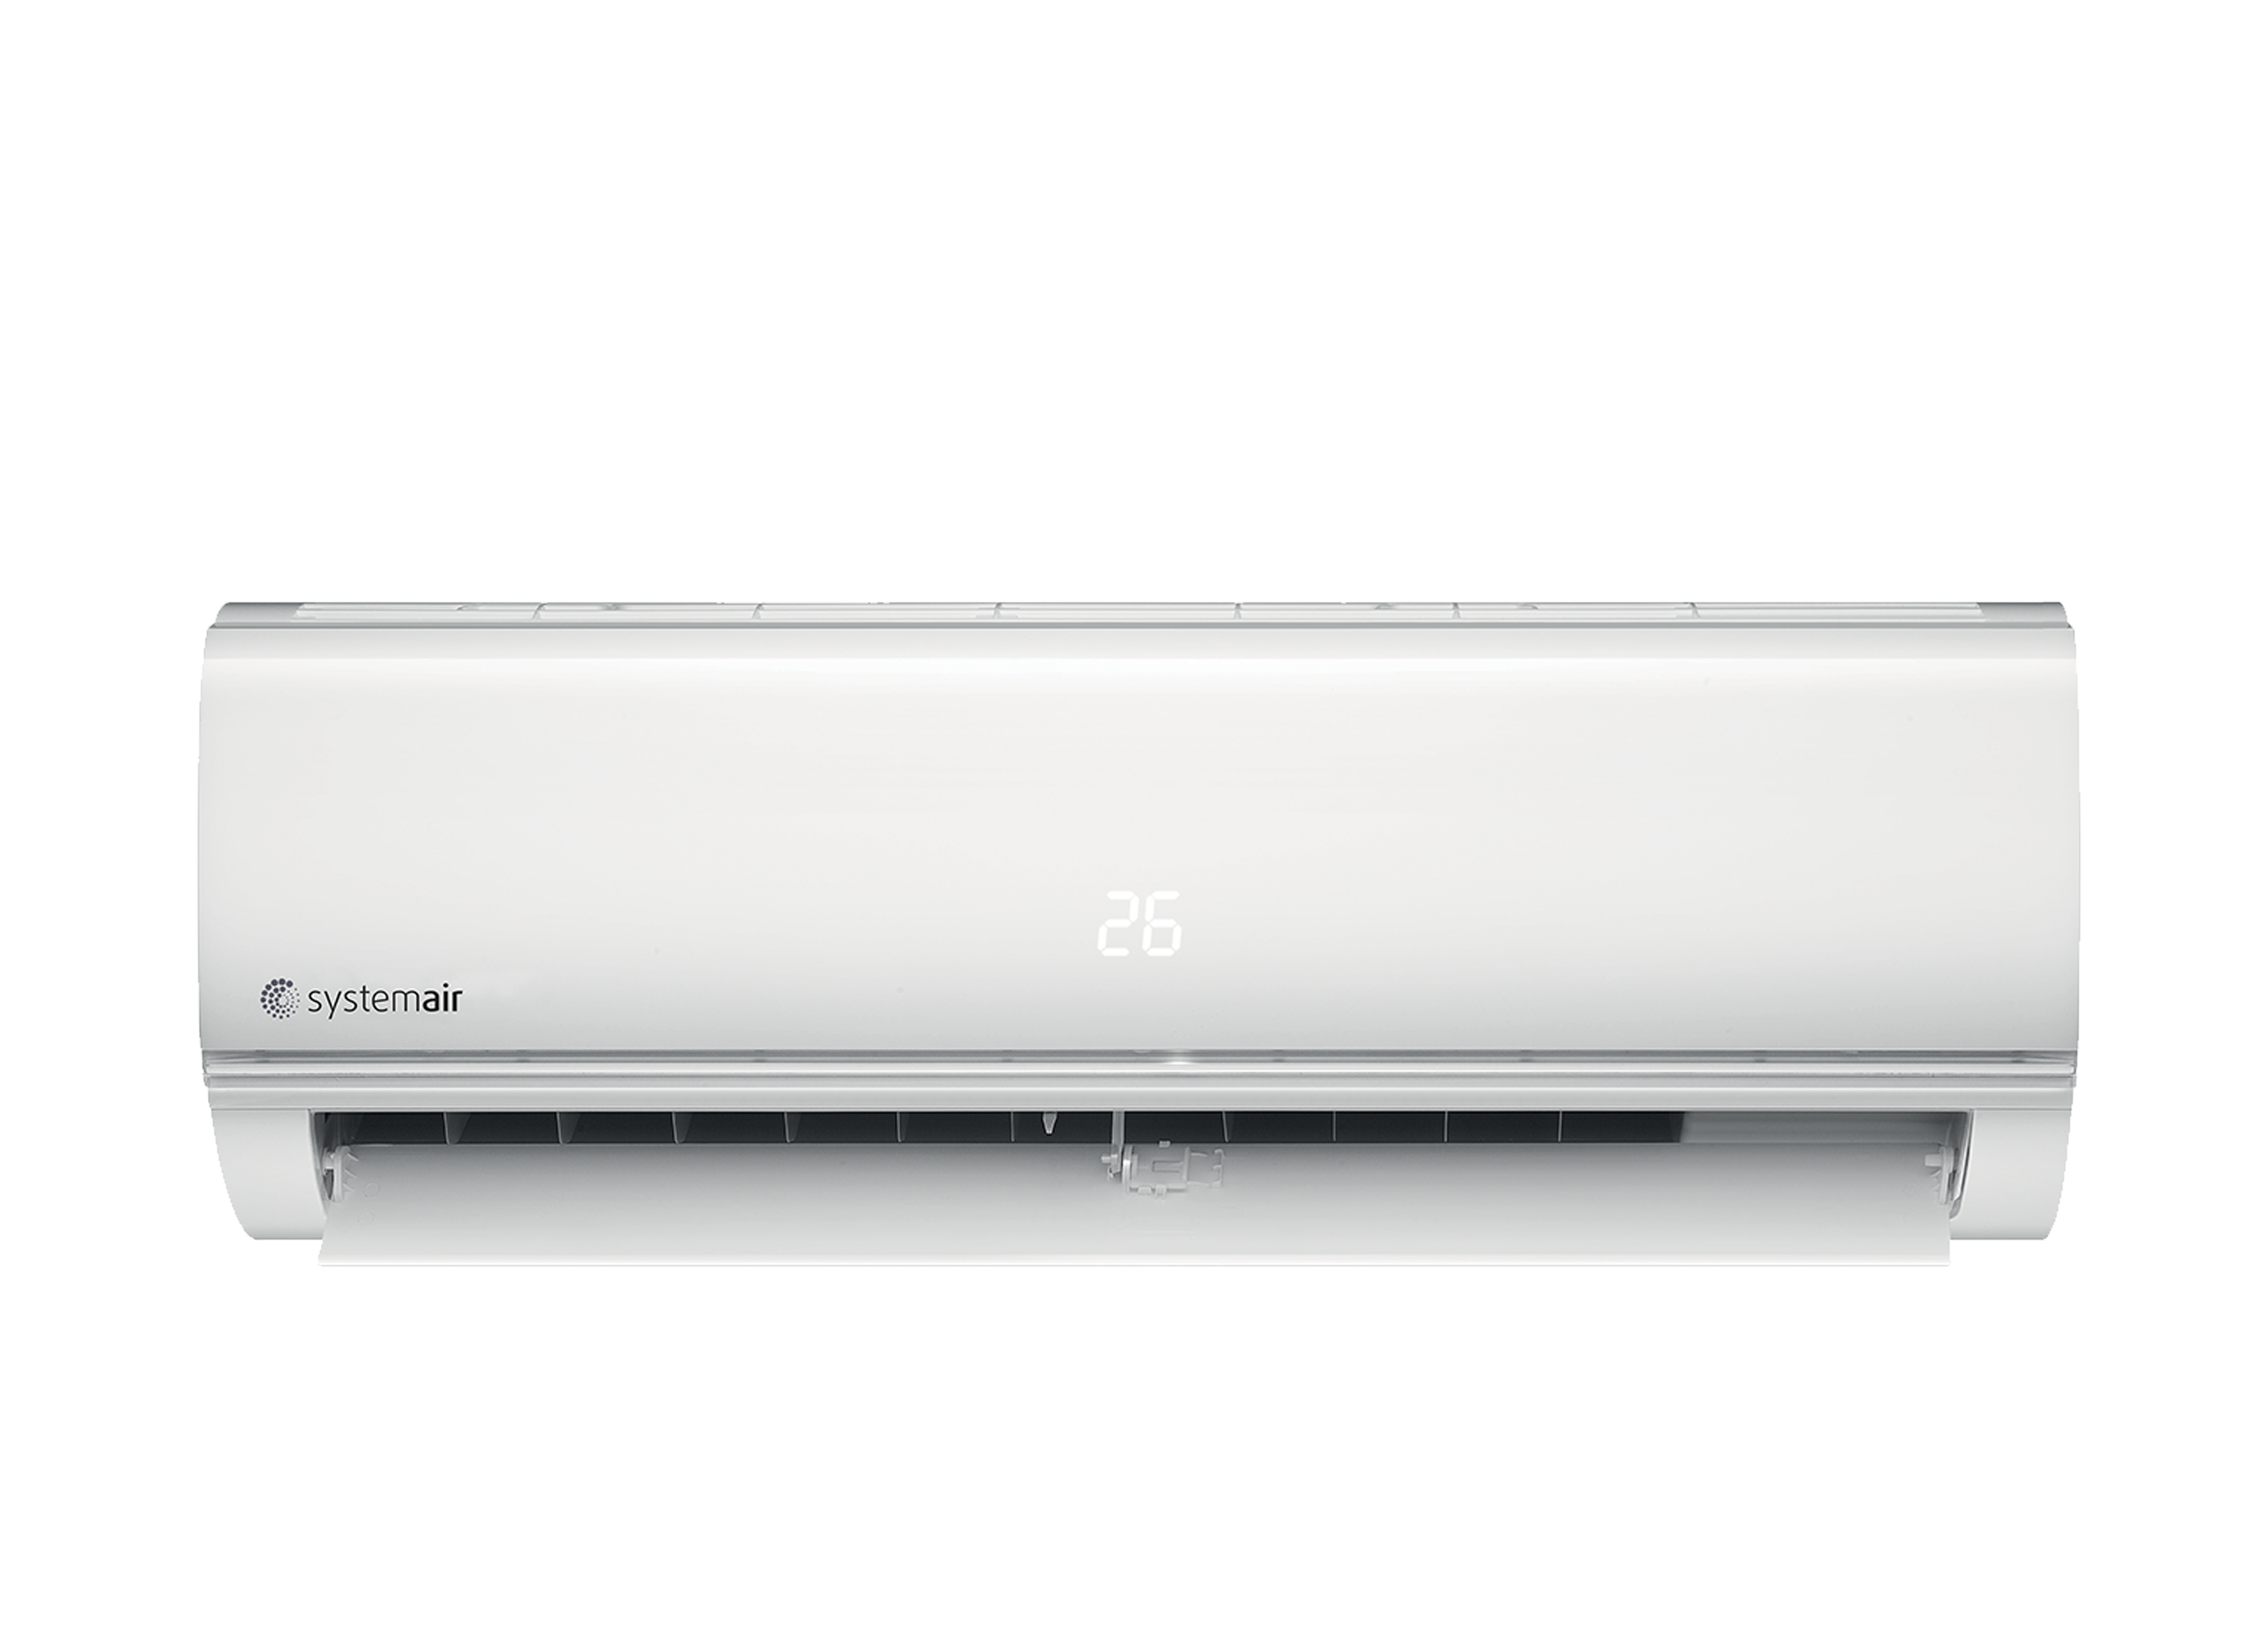 SYSPLIT WALL PRIME - Split Systems - Air Conditioners - Products - Systemair